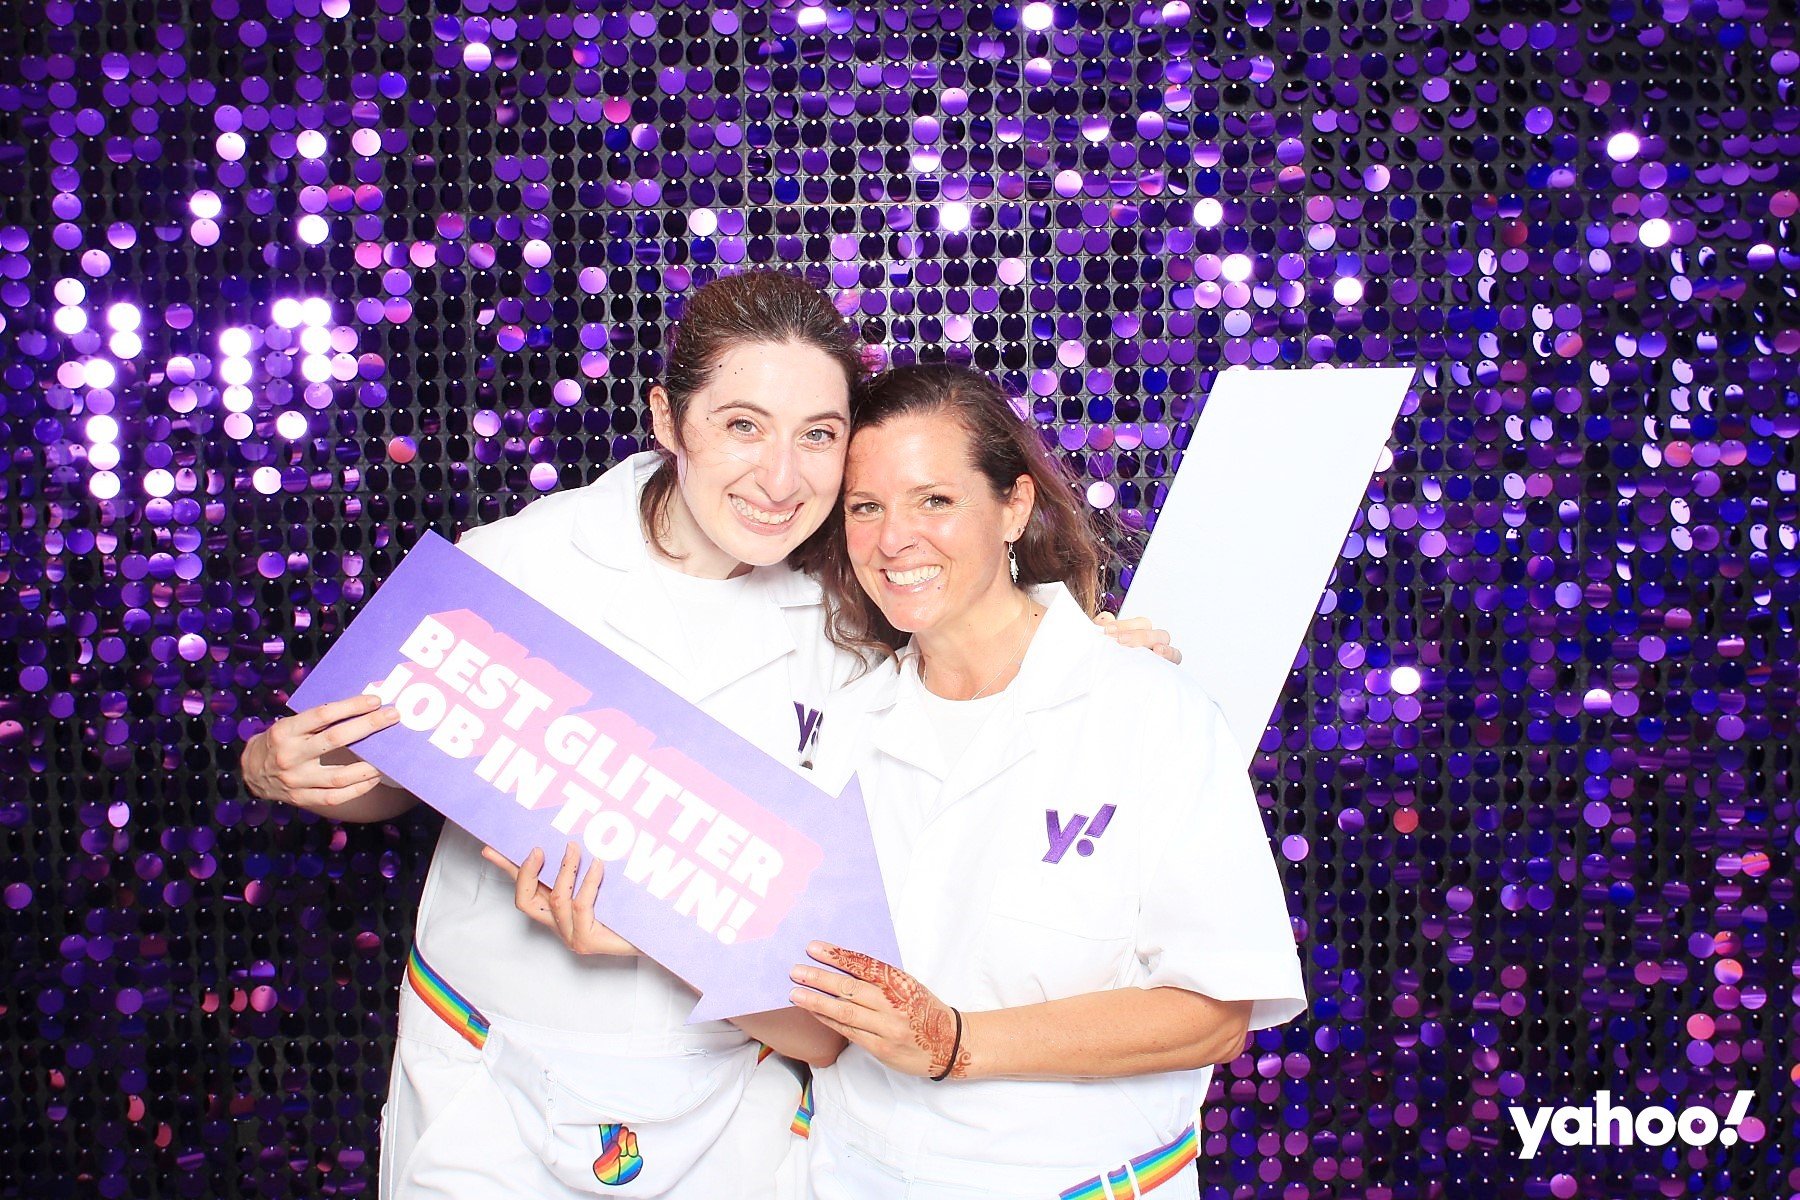 Yahoo Activation for Face and Body Glitter Washington DC NYC.JPG